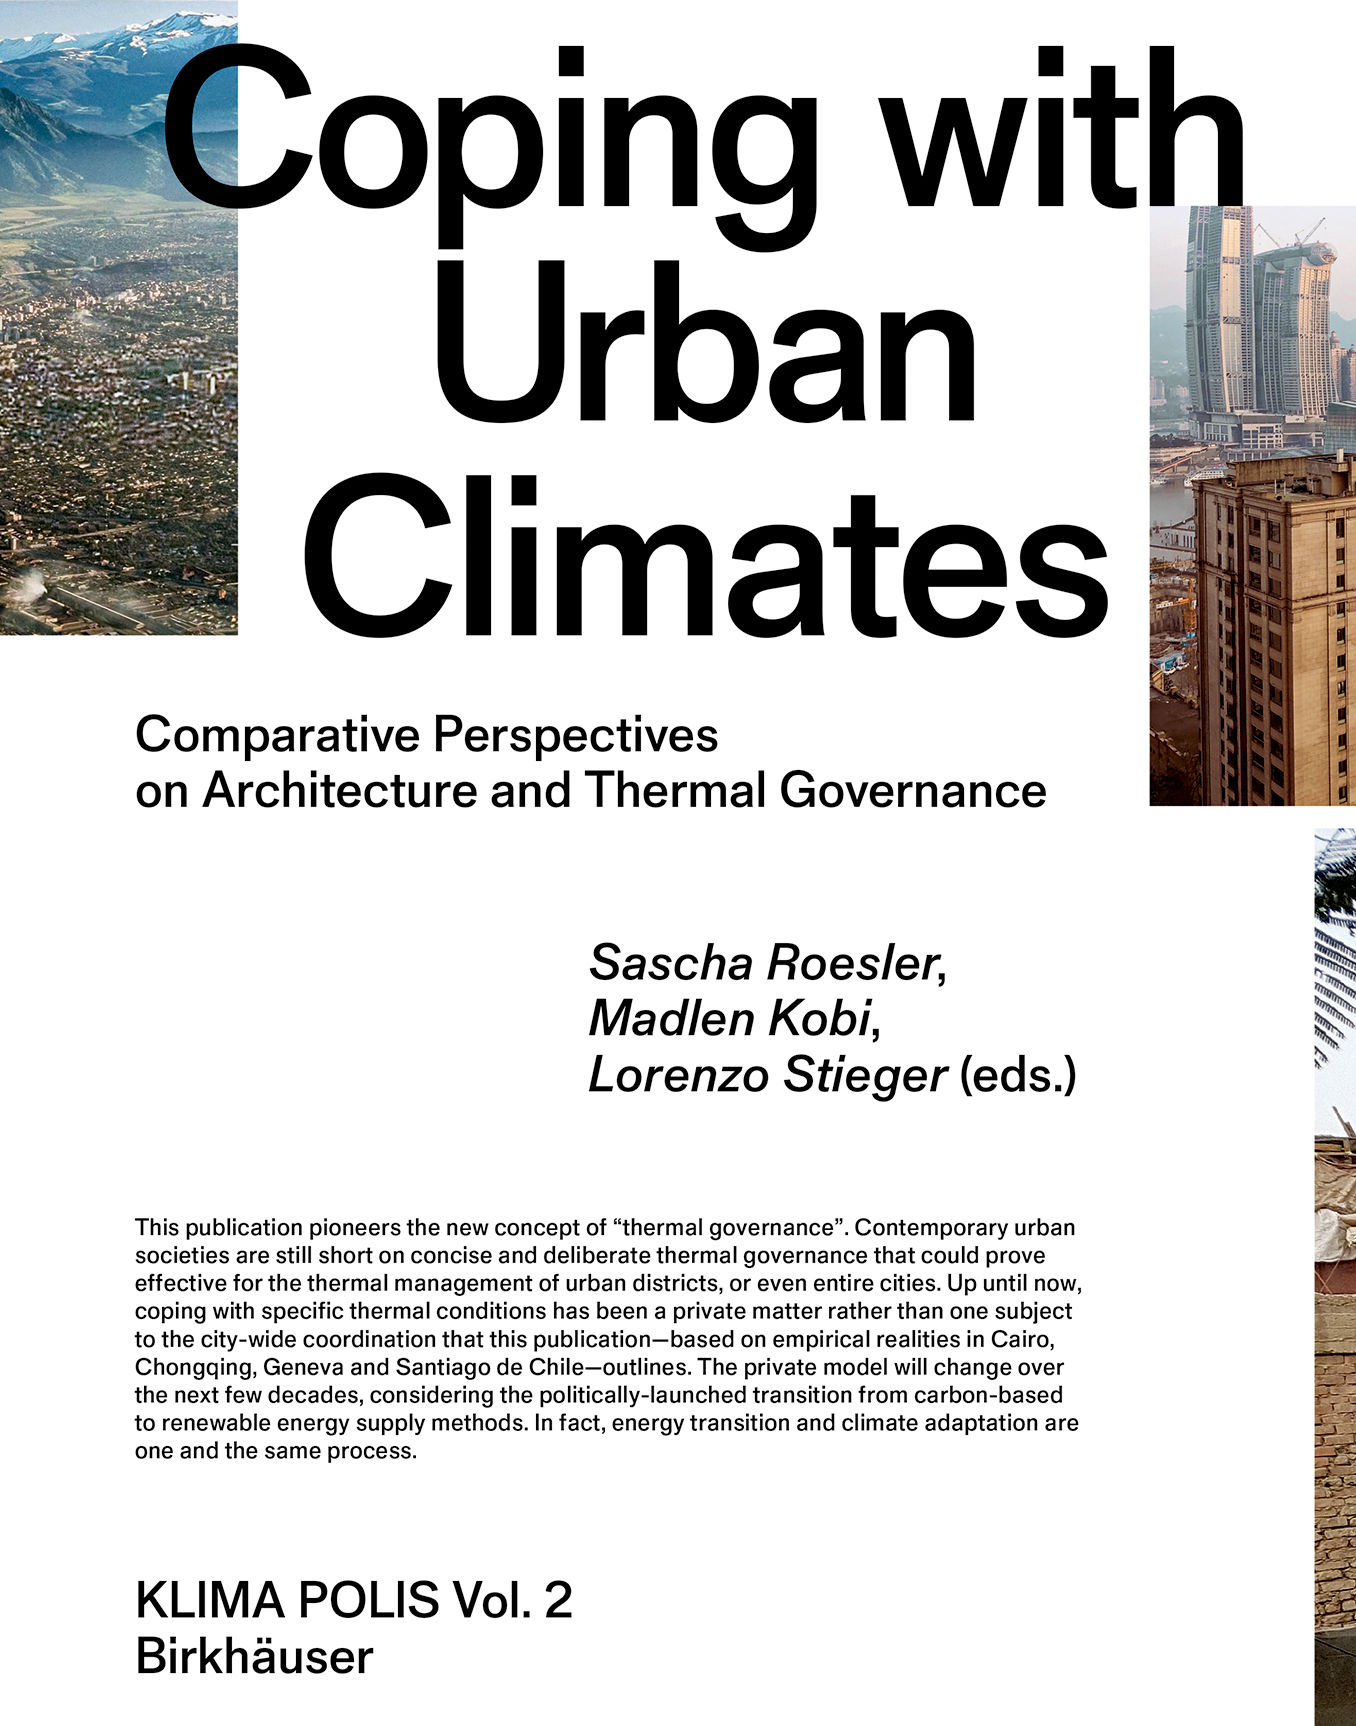 Coping with Urban Climates book cover